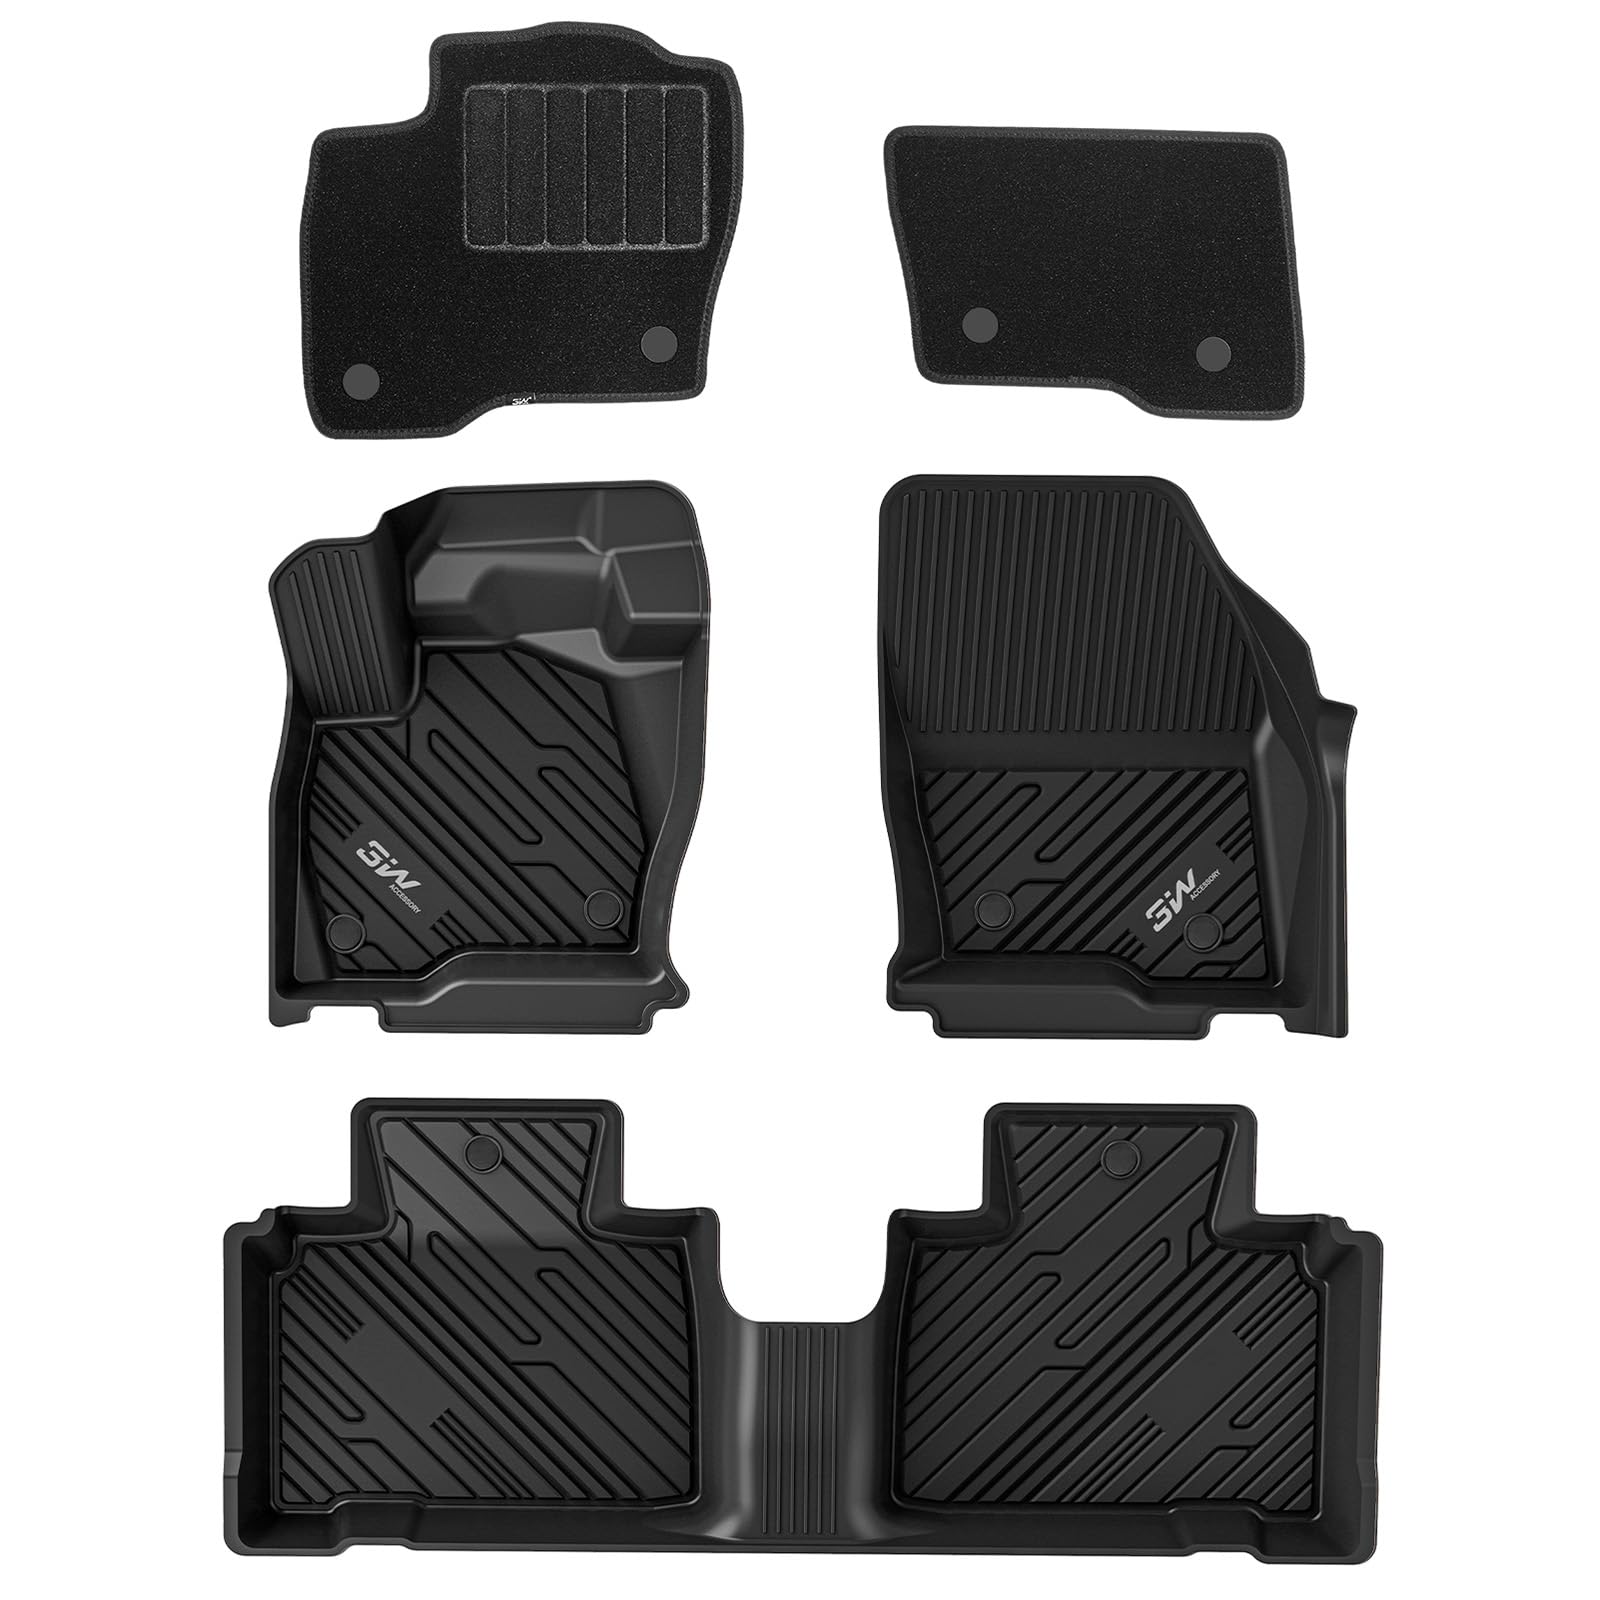 3W Ford Edge 2015-2024 Custom Floor Mats TPE Material & All-Weather Protection Vehicles & Parts 3Wliners 2015-2024 Edge 2015-2024 1st&2nd Row Mats with Front Carpet